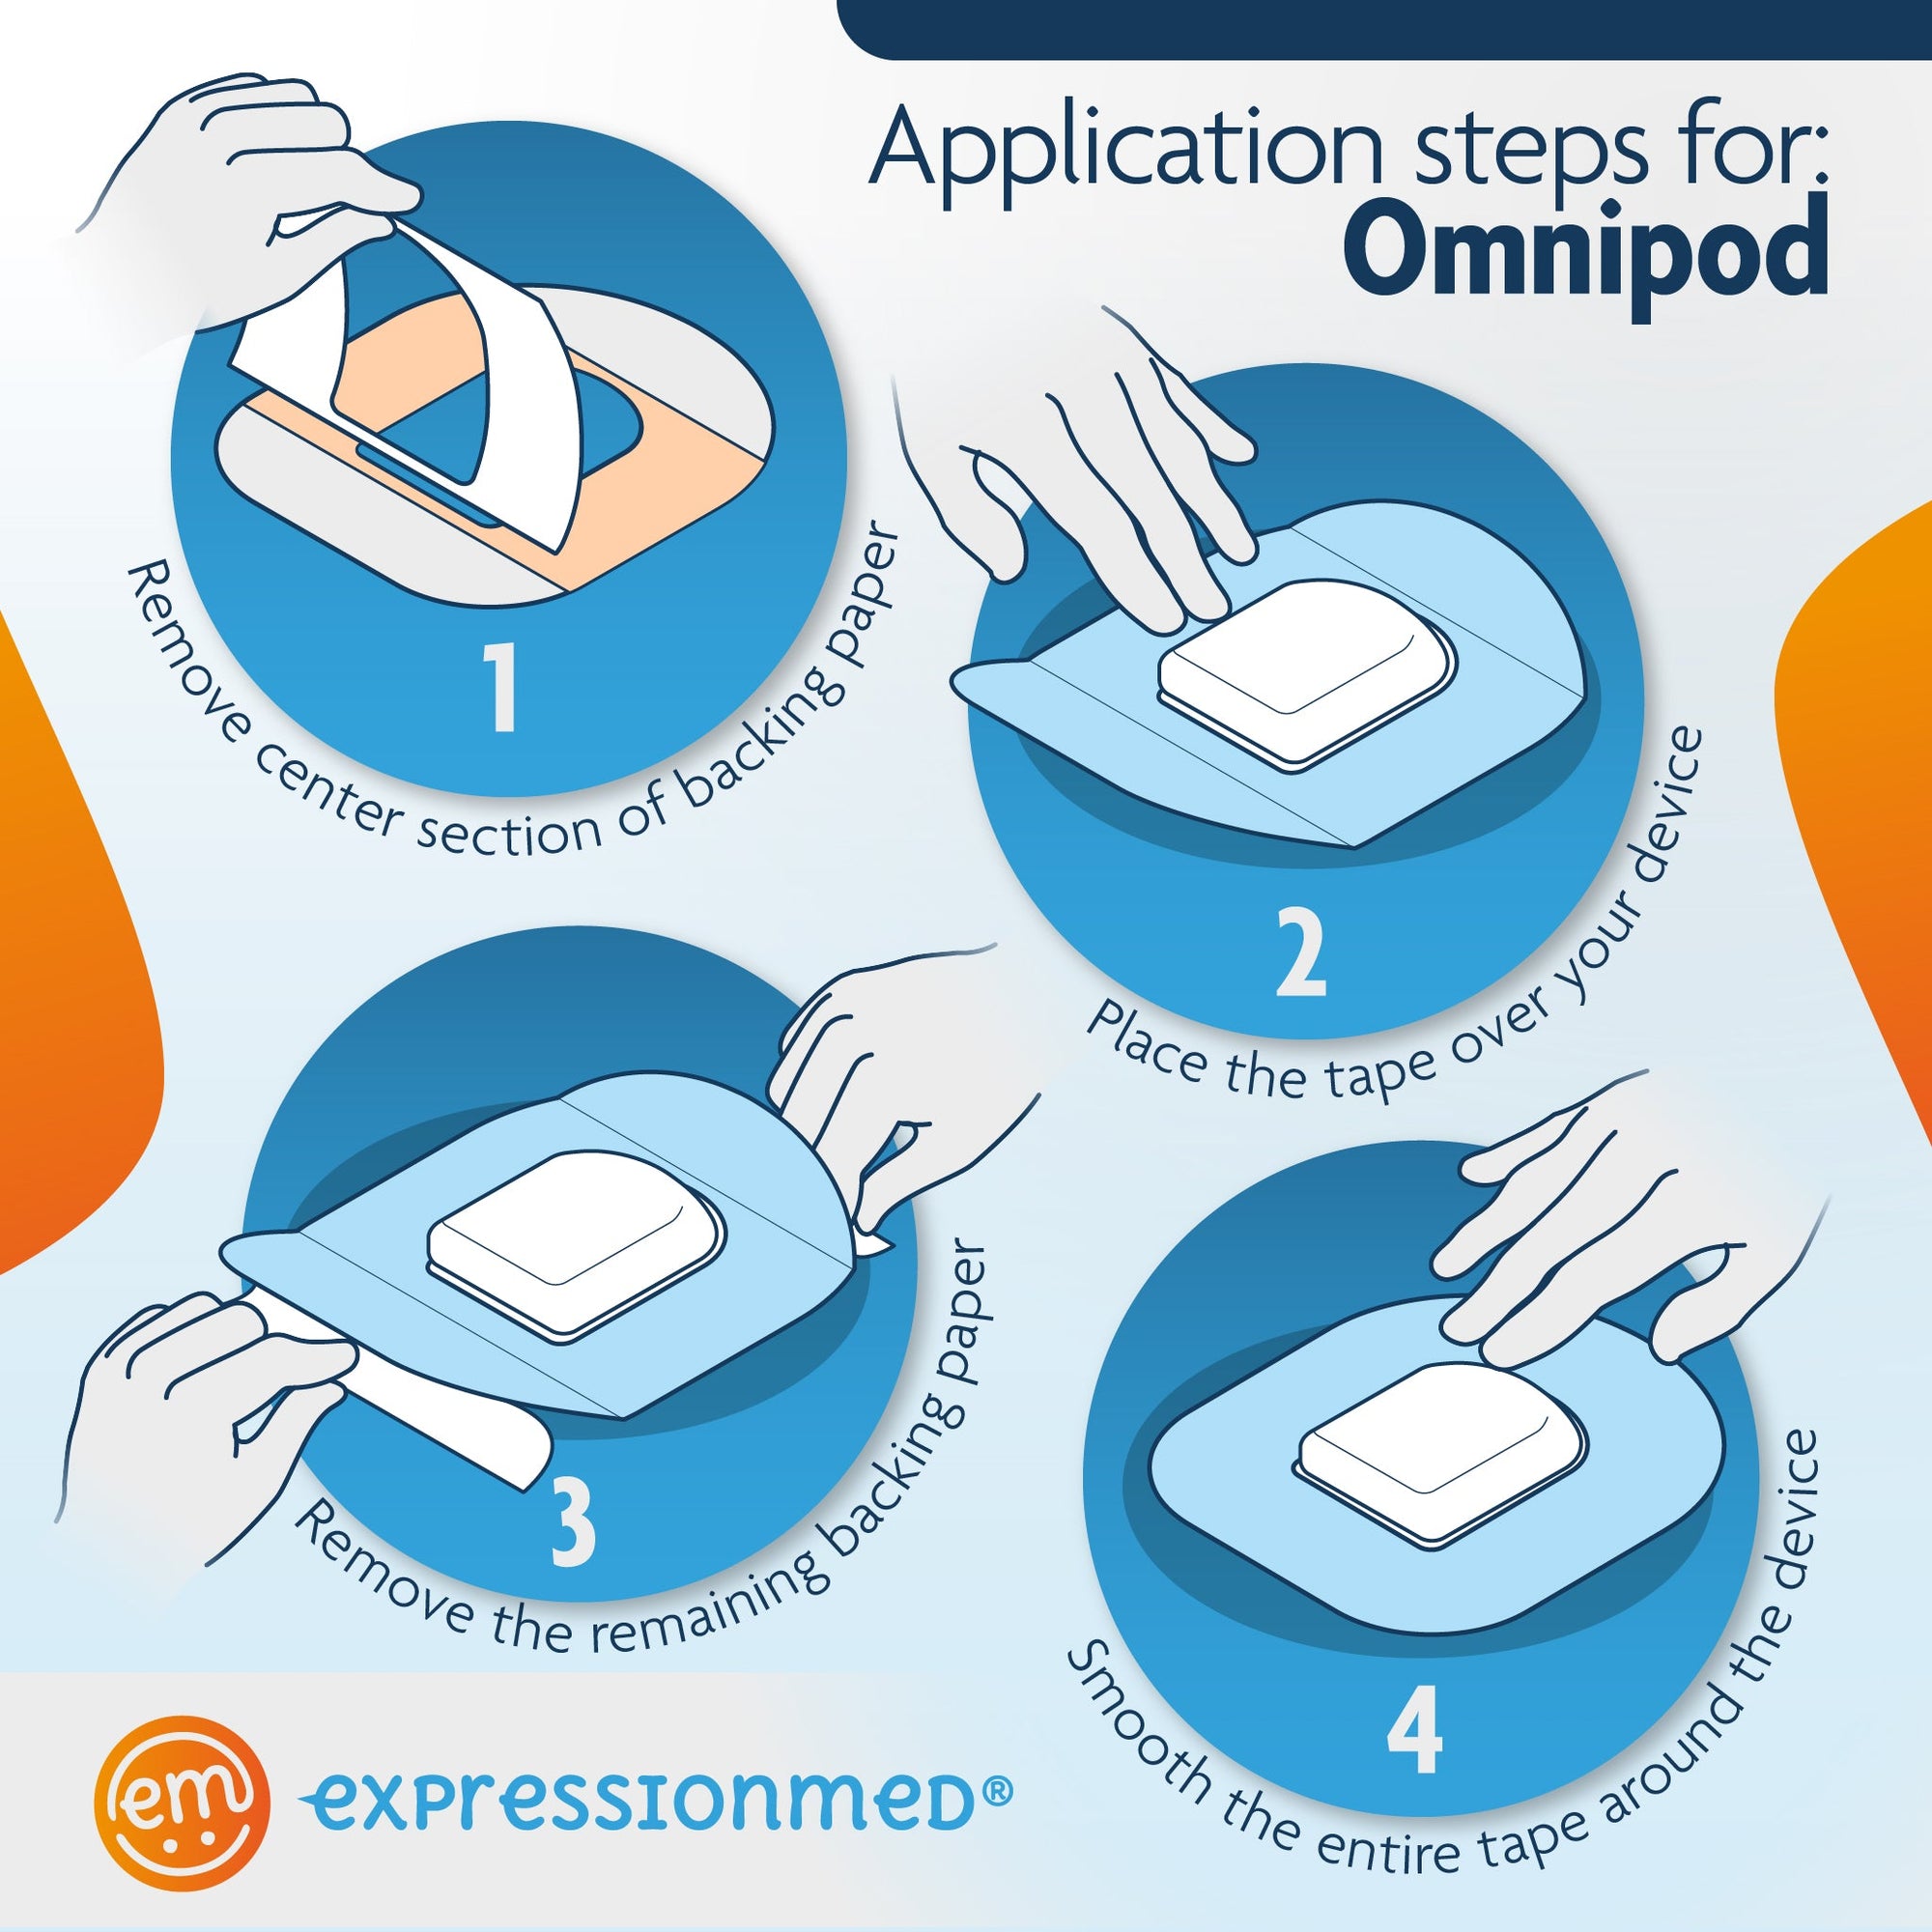 ExpressionMed Application Instructions . 1. Prep skin with soap and water. 2. Remove Middle Section and lay center hole over device. 3. Peel off both end sections and smooth down on skin. To remove, hold an edge and strech material off skin.